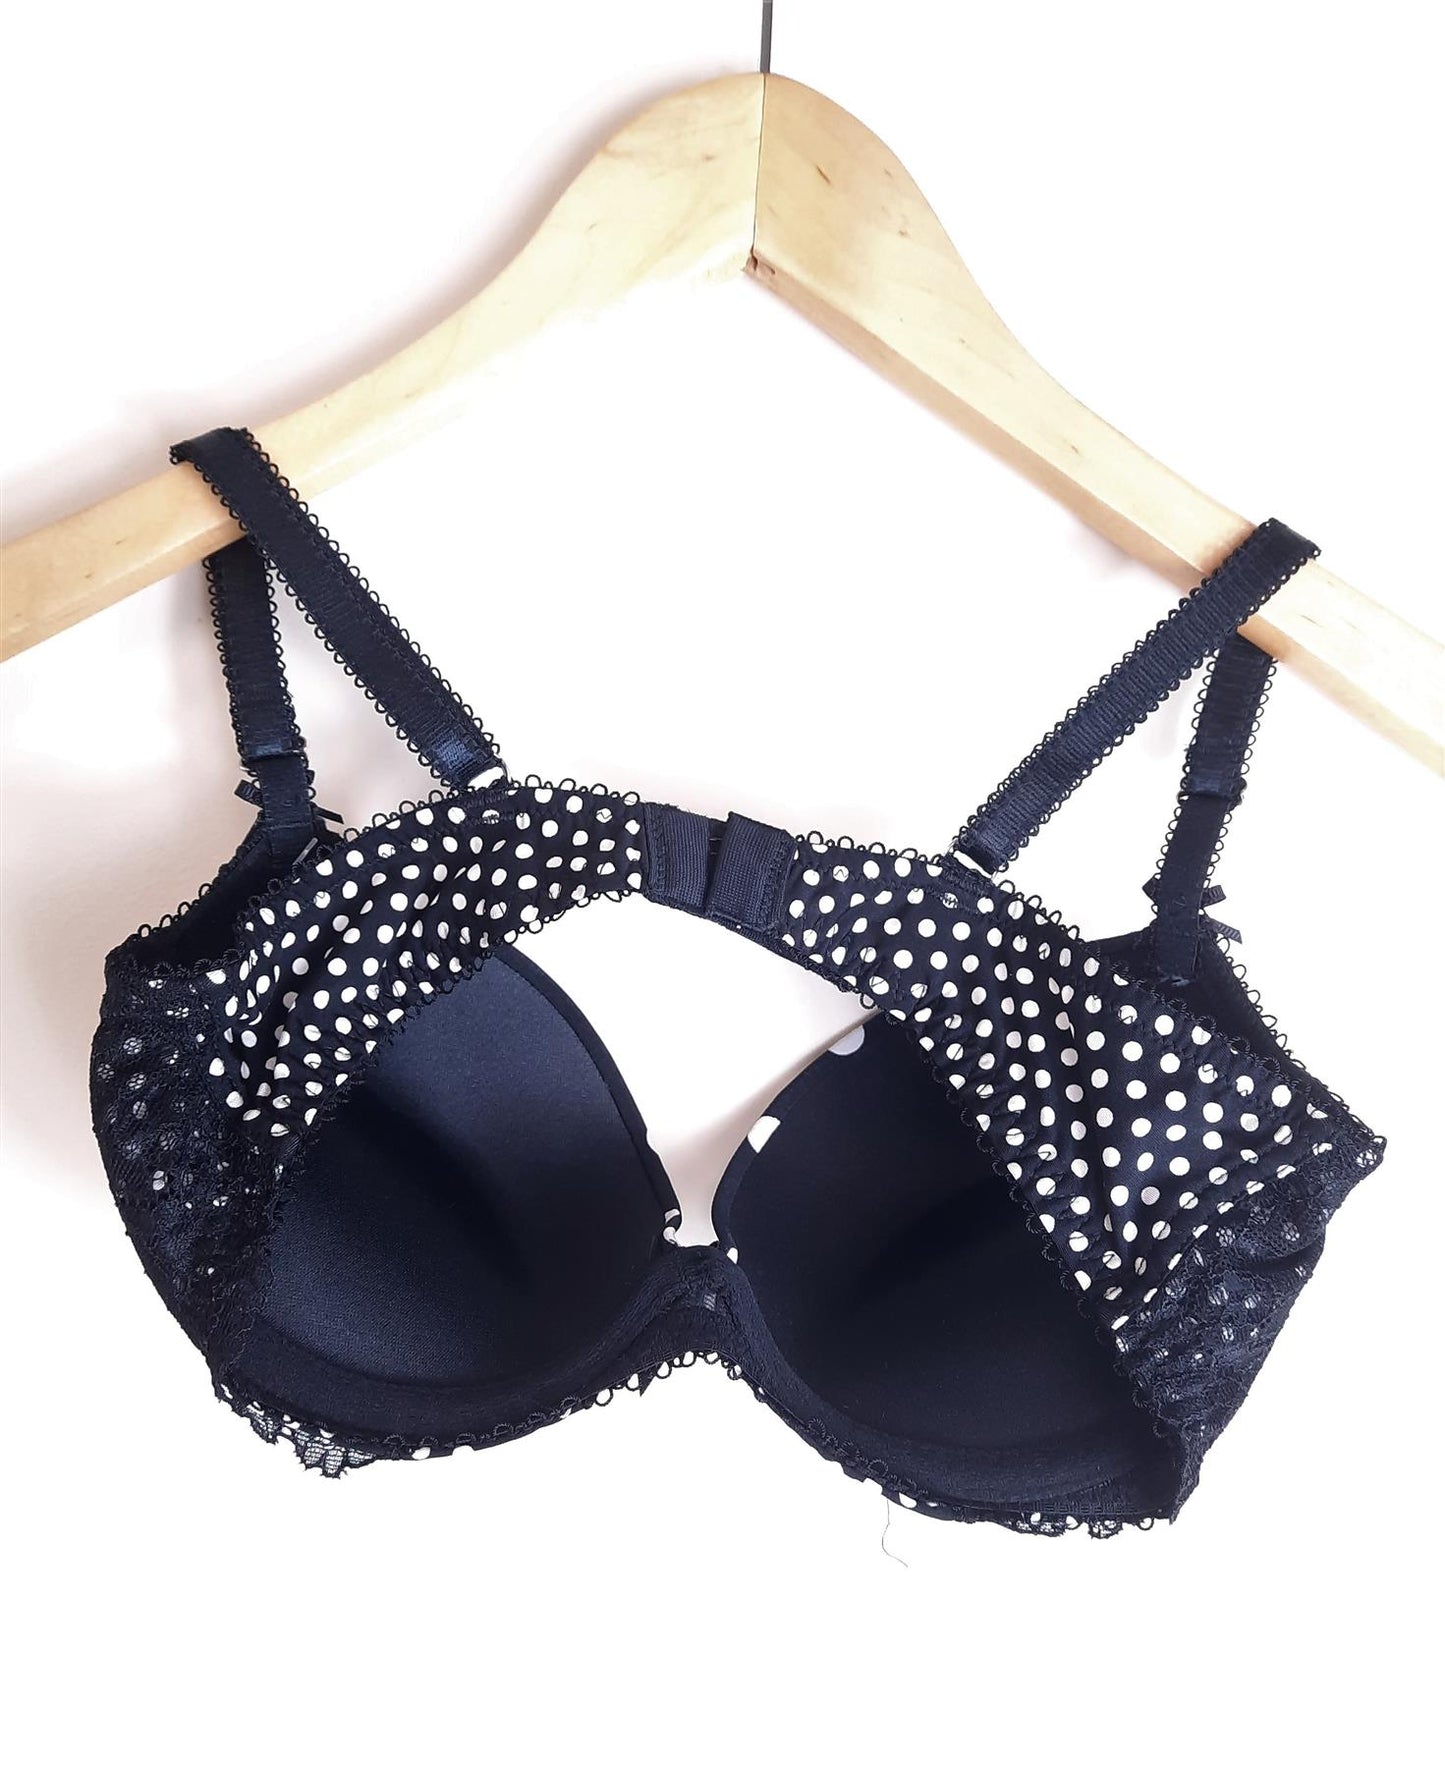 2pk Boux Avenue Bras Push-Up Plunge Underwired Polka Dot Multipack Brand New